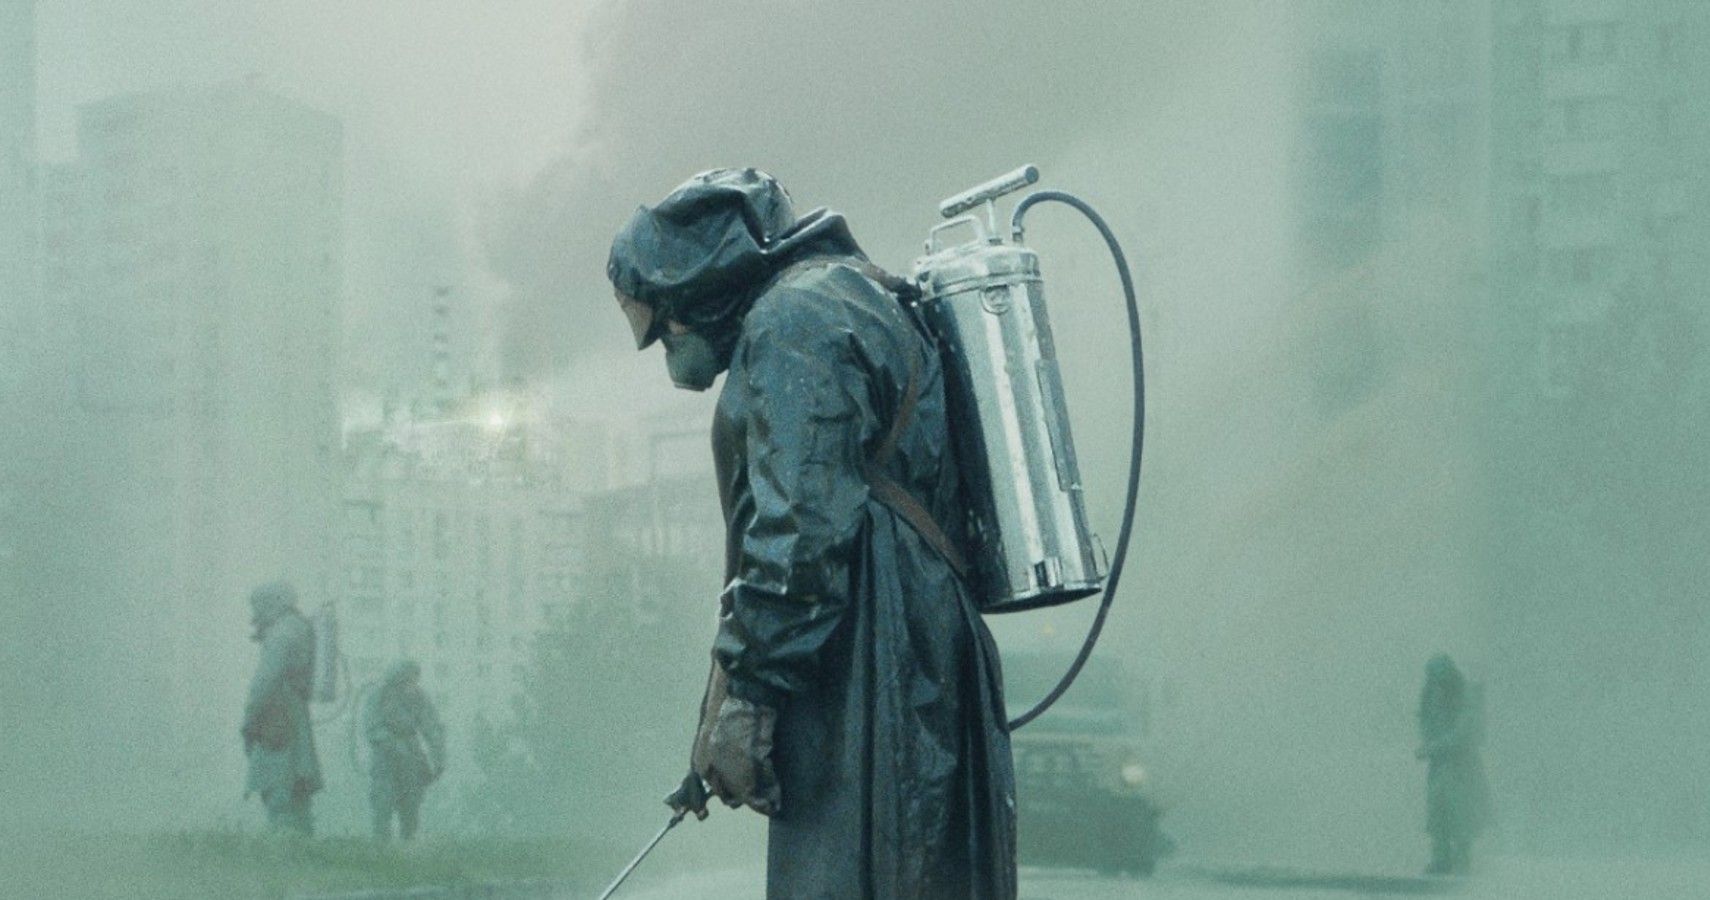 Workers in hazmat suit in the aftermath of Chernobyl